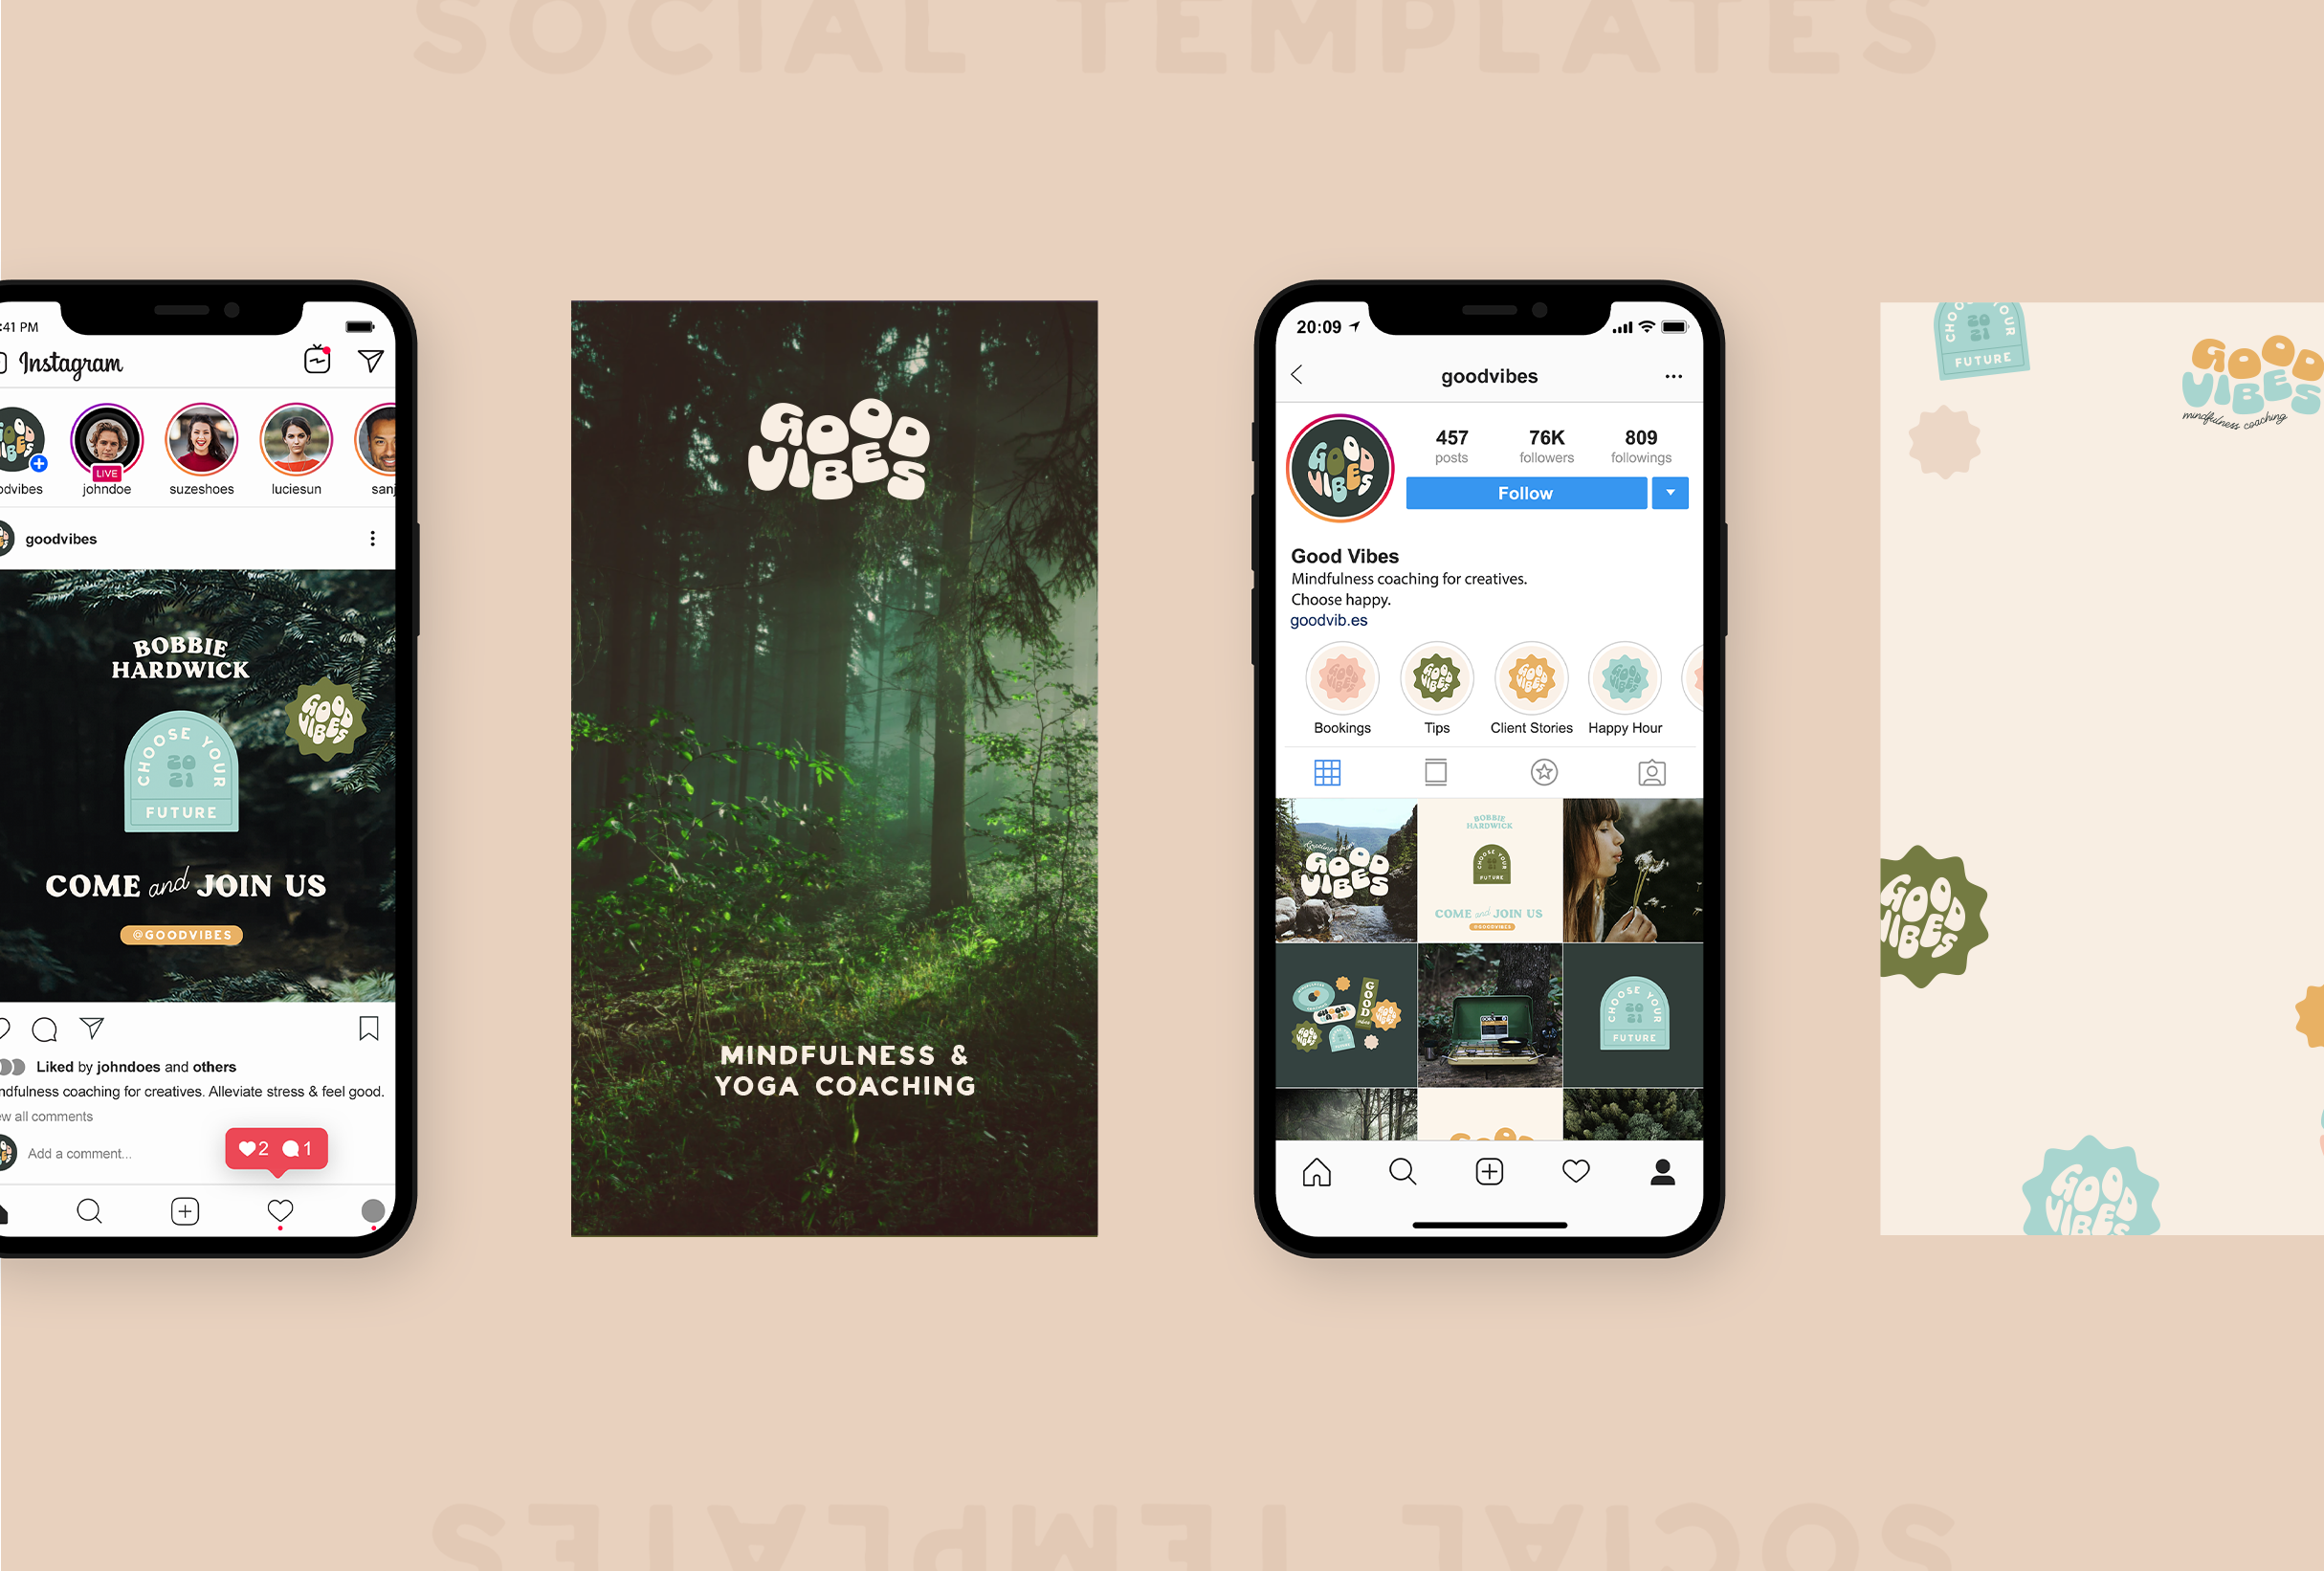 Instagram grid and story templates for Bobbie at Good Vibes, a mindfulness & coaching business for women within the creative & tech industries - designed by Wiltshire-based graphic designer, Kaye Huett